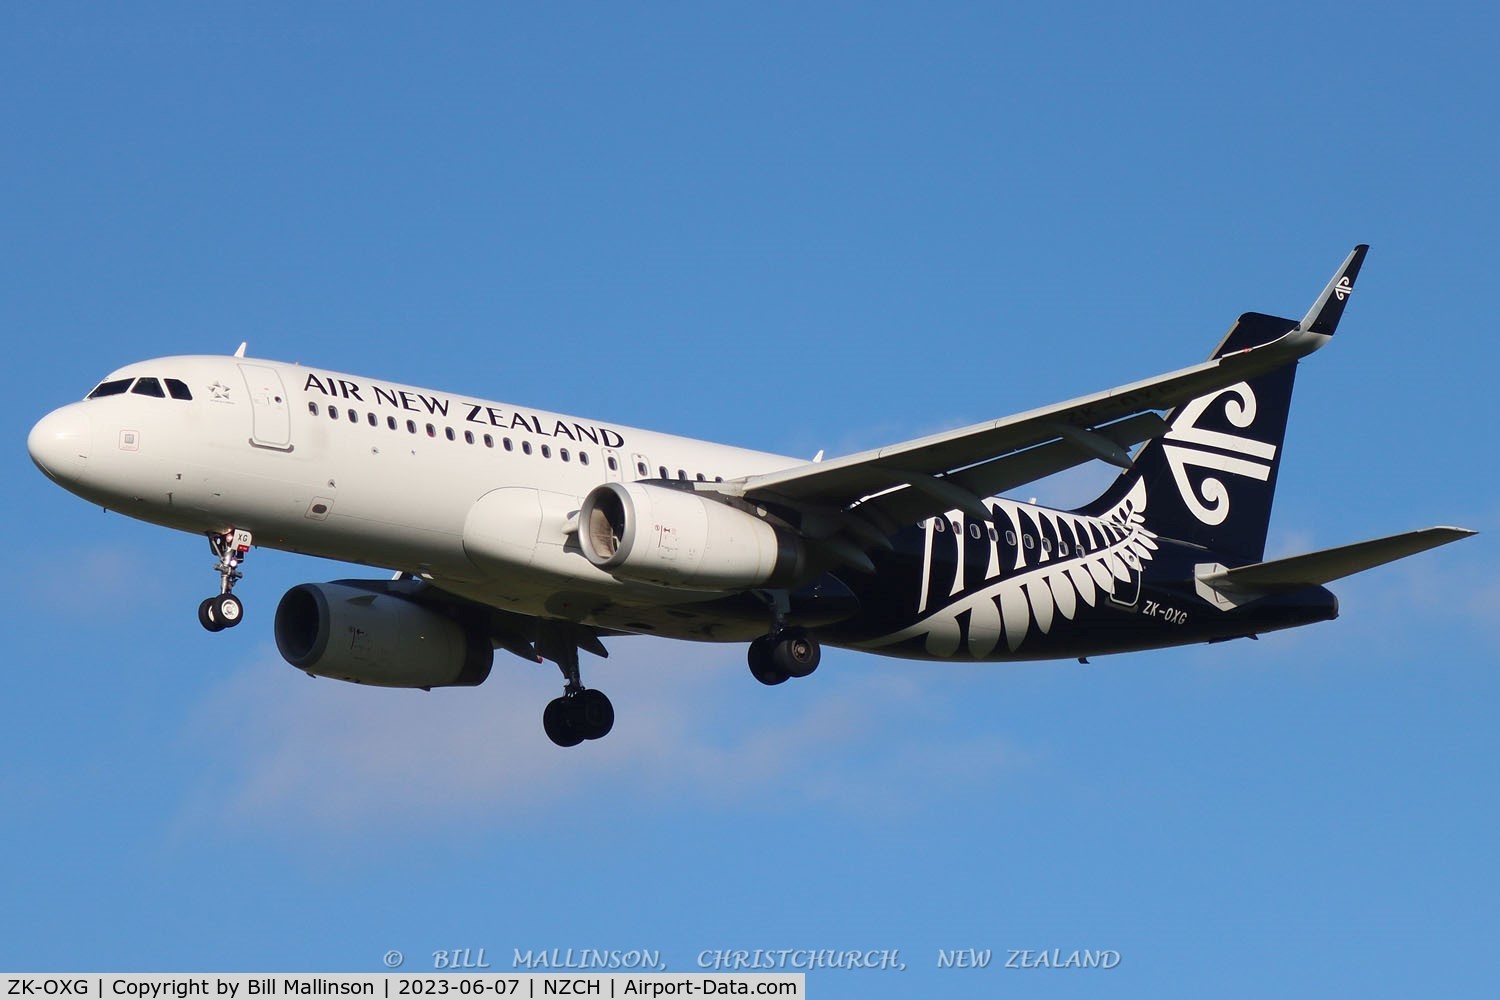 ZK-OXG, 2015 Airbus A320-232 C/N 6460, NZ353 from WLG